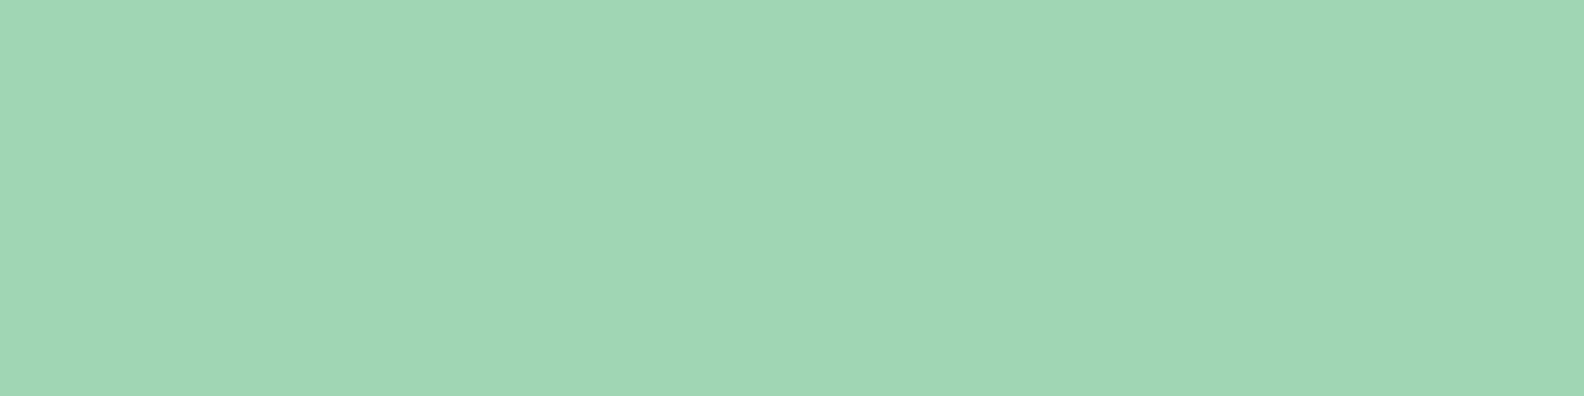 1584x396 Turquoise Green Solid Color Background